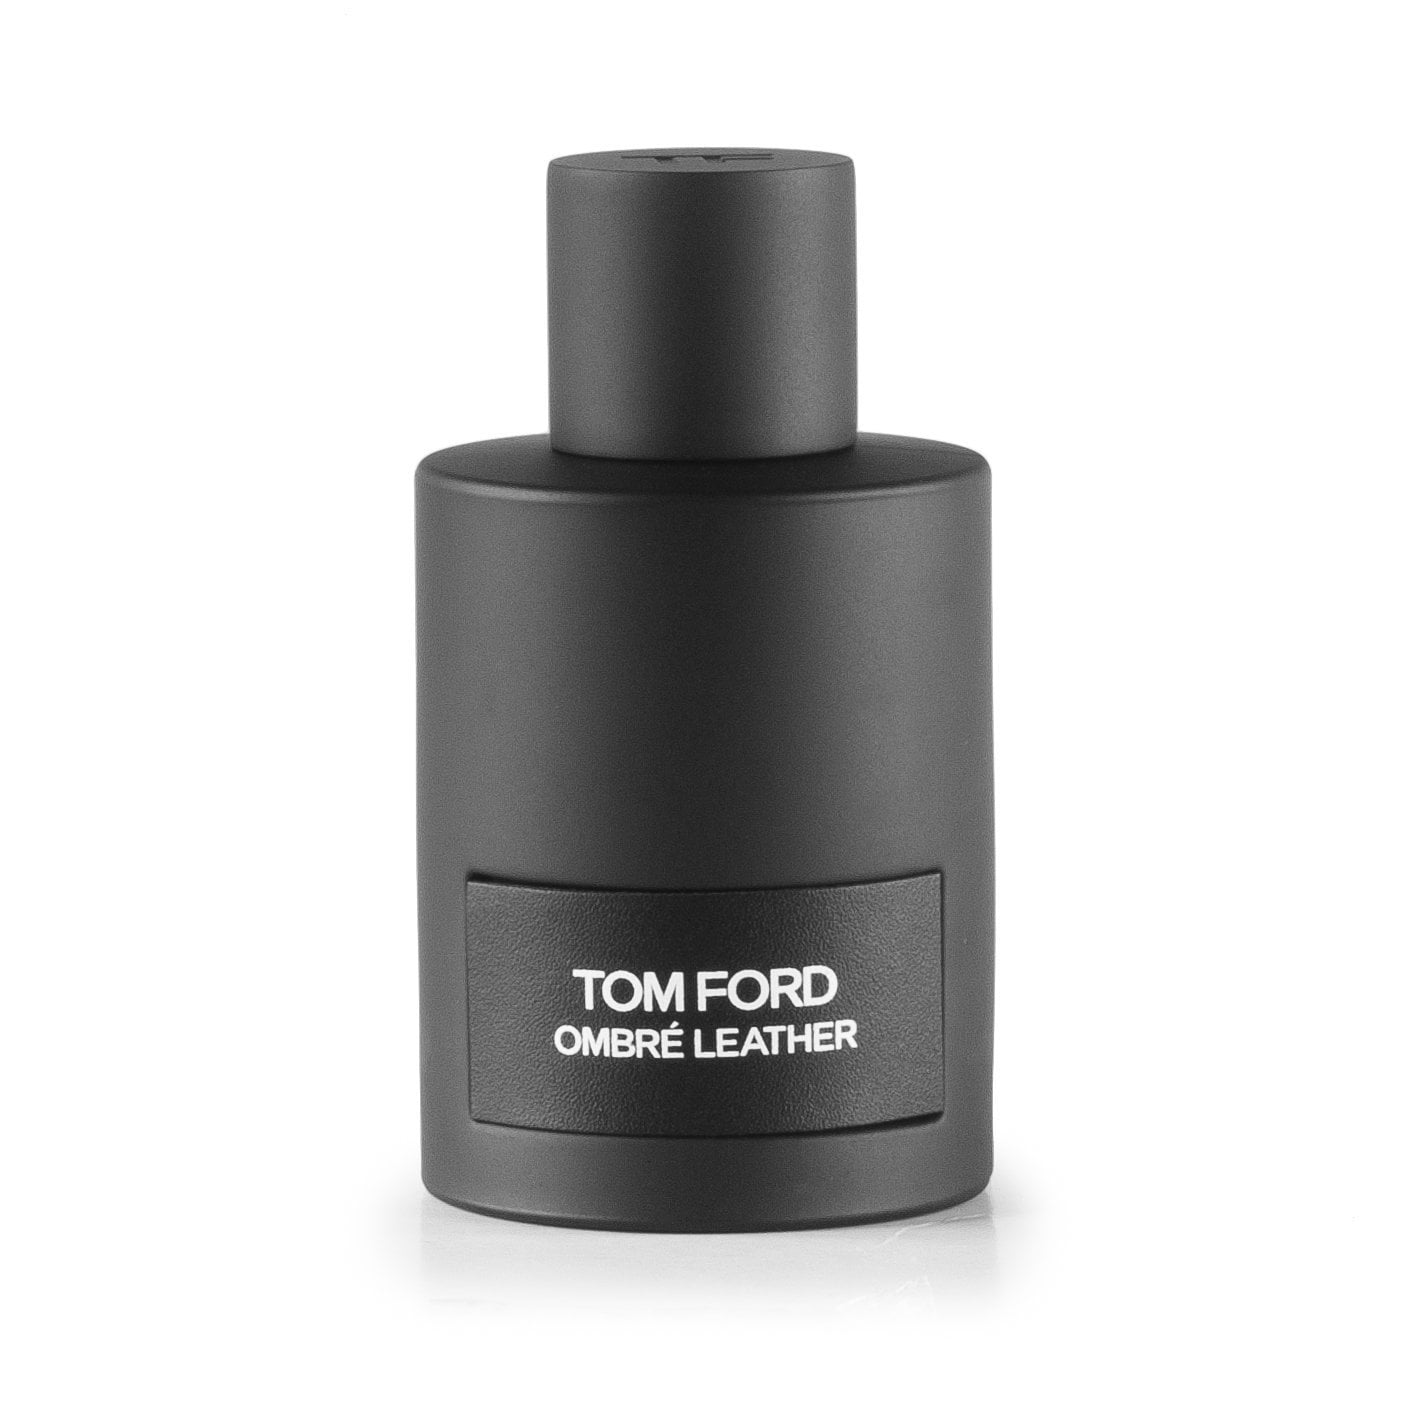 Ombre Leather Eau de Parfum Spray for Men by Tom Ford, Product image 4